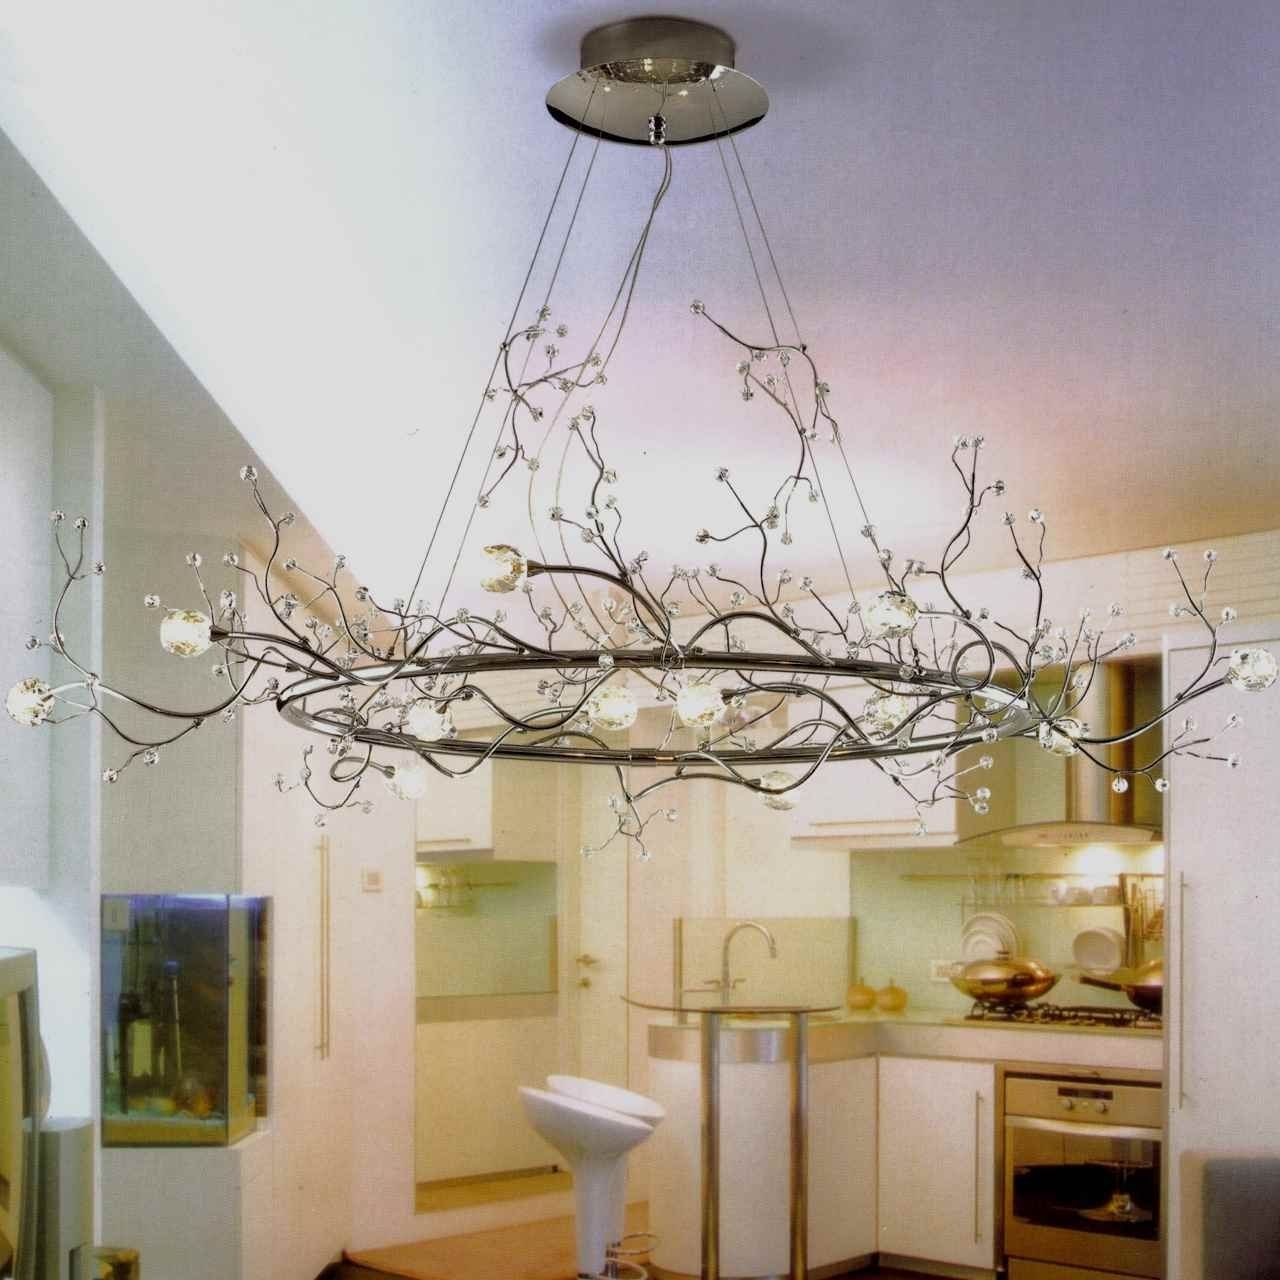 Preferred 40" Albero Modern Crystal Branch Oval Chandelier Polished Chrome 8 In Crystal Branch Chandelier (View 5 of 15)